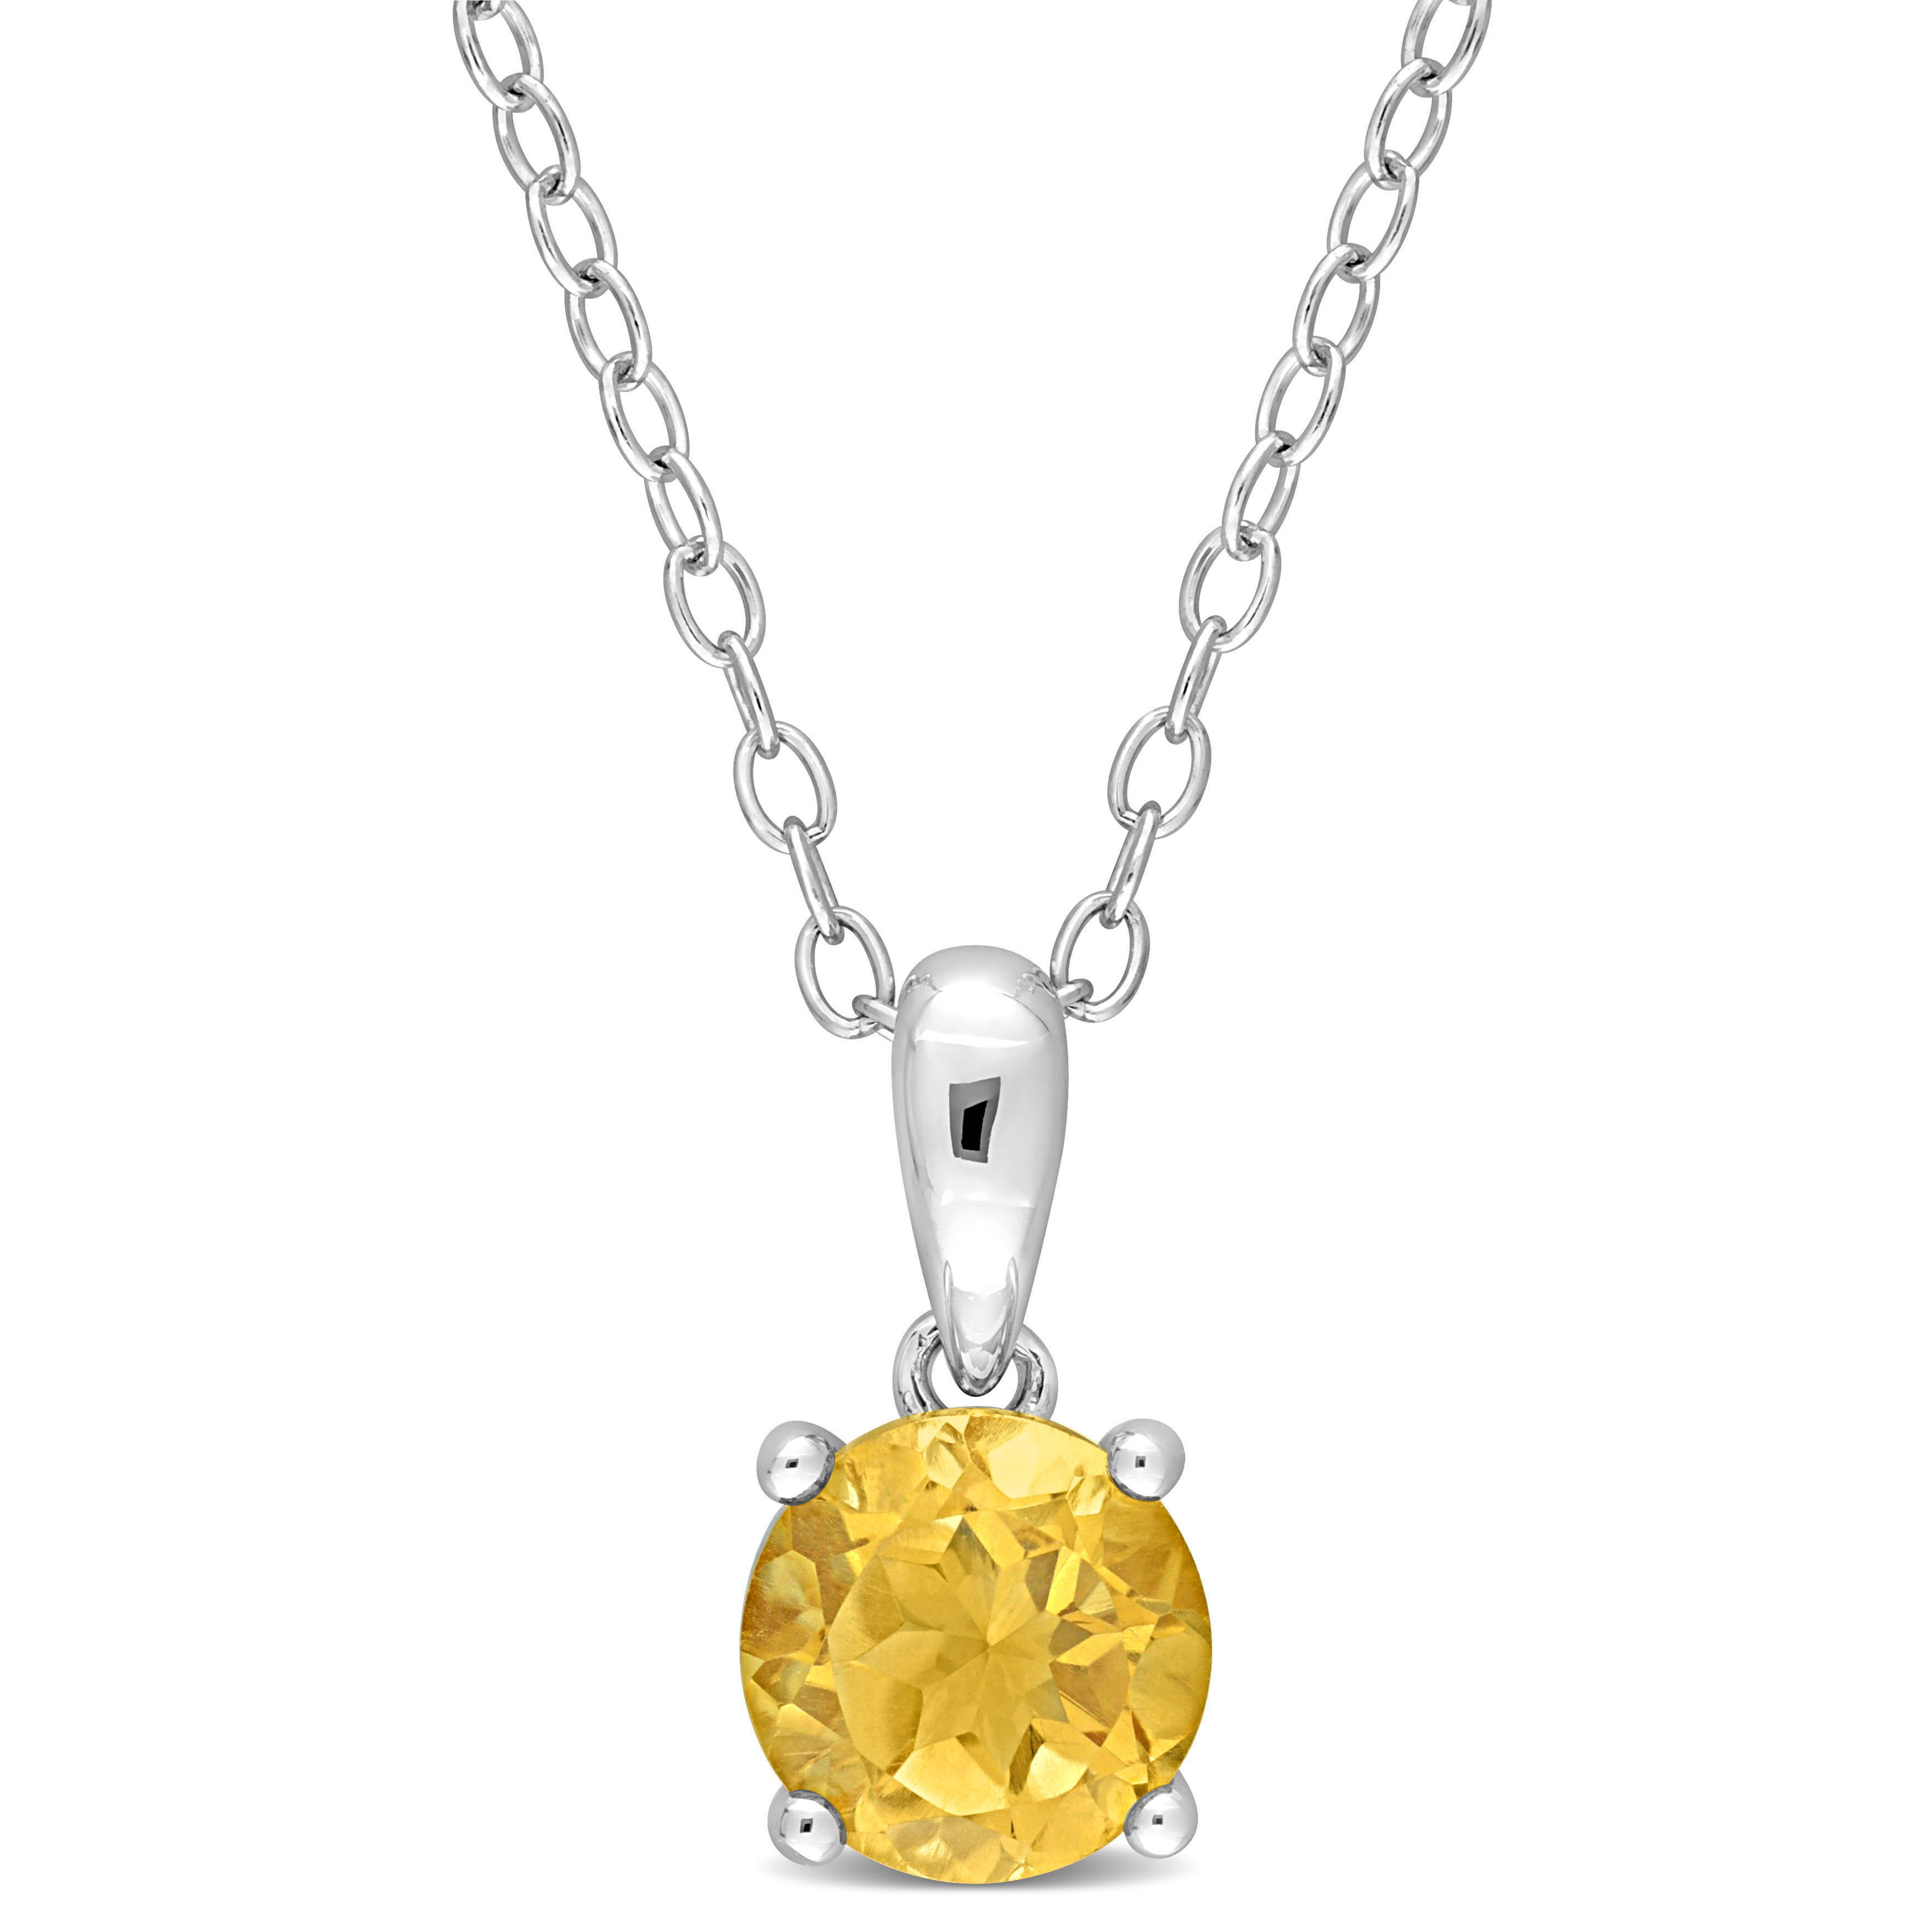 3/4 CT TGW Citrine Solitaire Heart Design Pendant with Chain in Sterling Silver - 18 in.